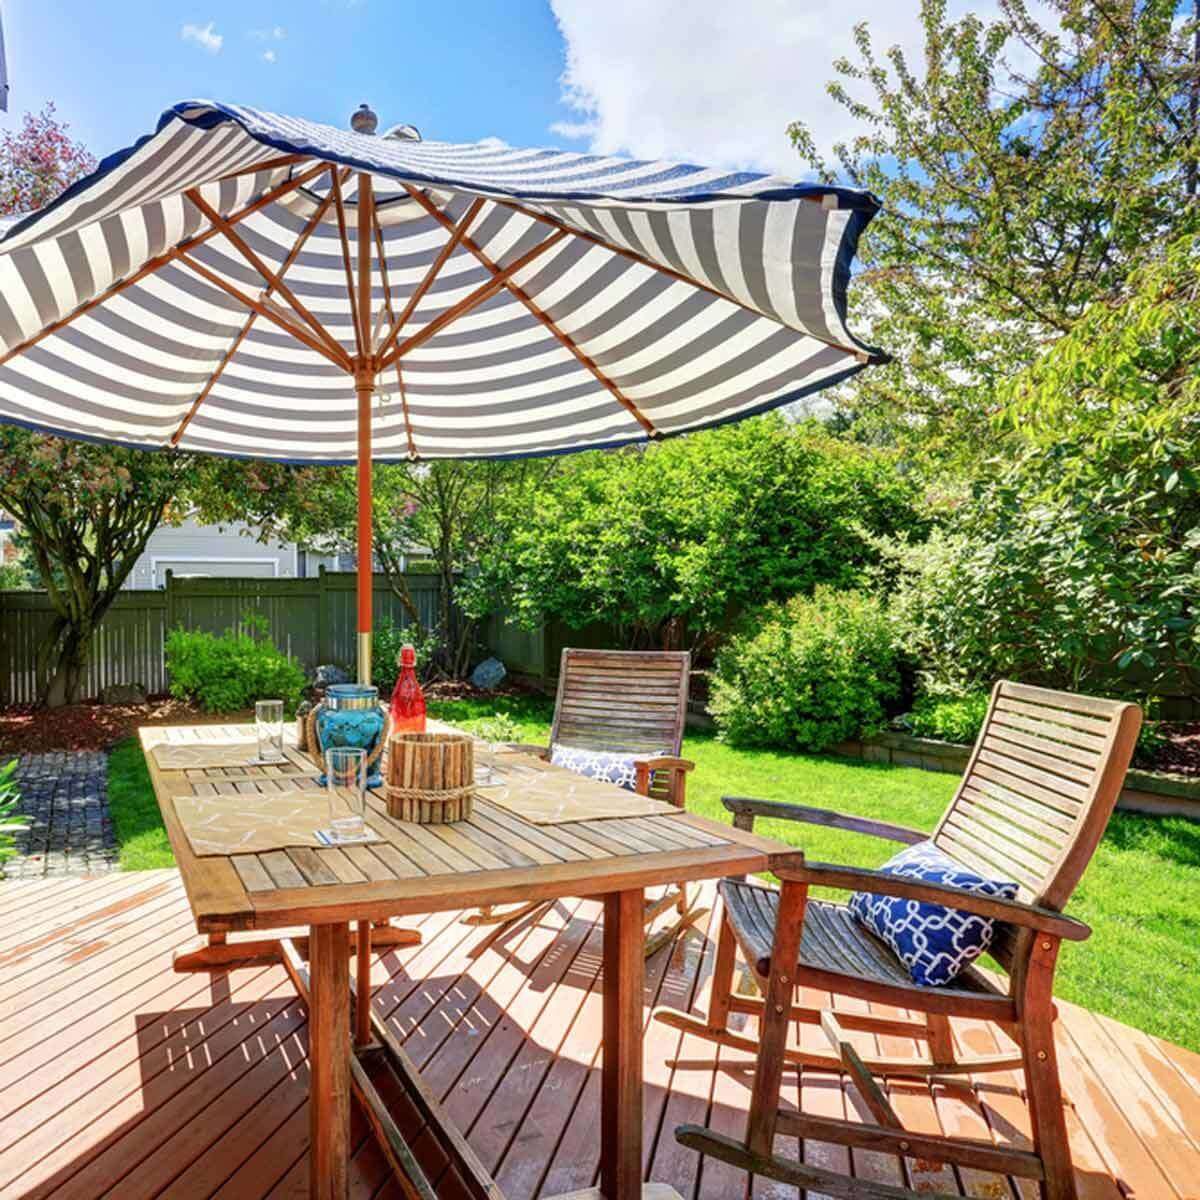 11 Ways to Create Shade for the Deck or Patio